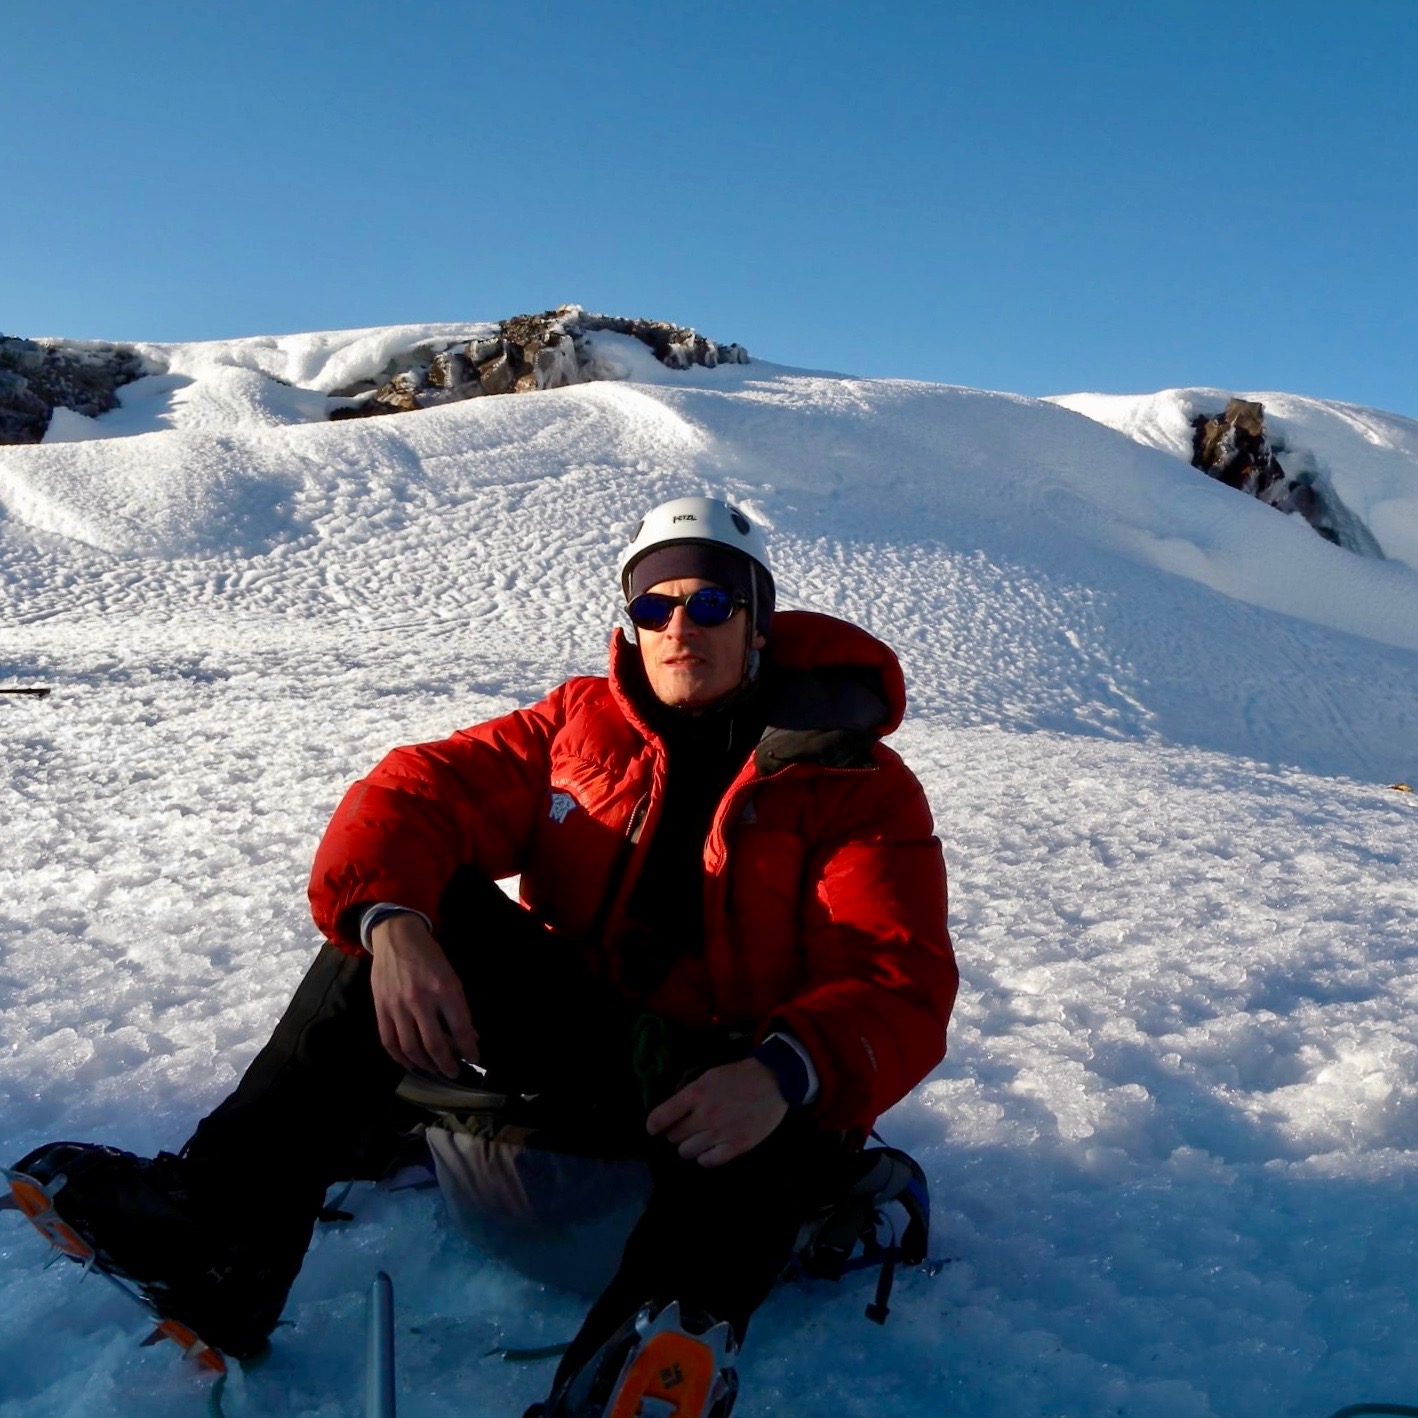 Matthew Kessi sits down on the snow covered glacier at the summit of Mt. Rainier after an all night climb up the side of the mountain.  He's wearing sunglasses and a whit helmet and spikes on the hiking boots.  